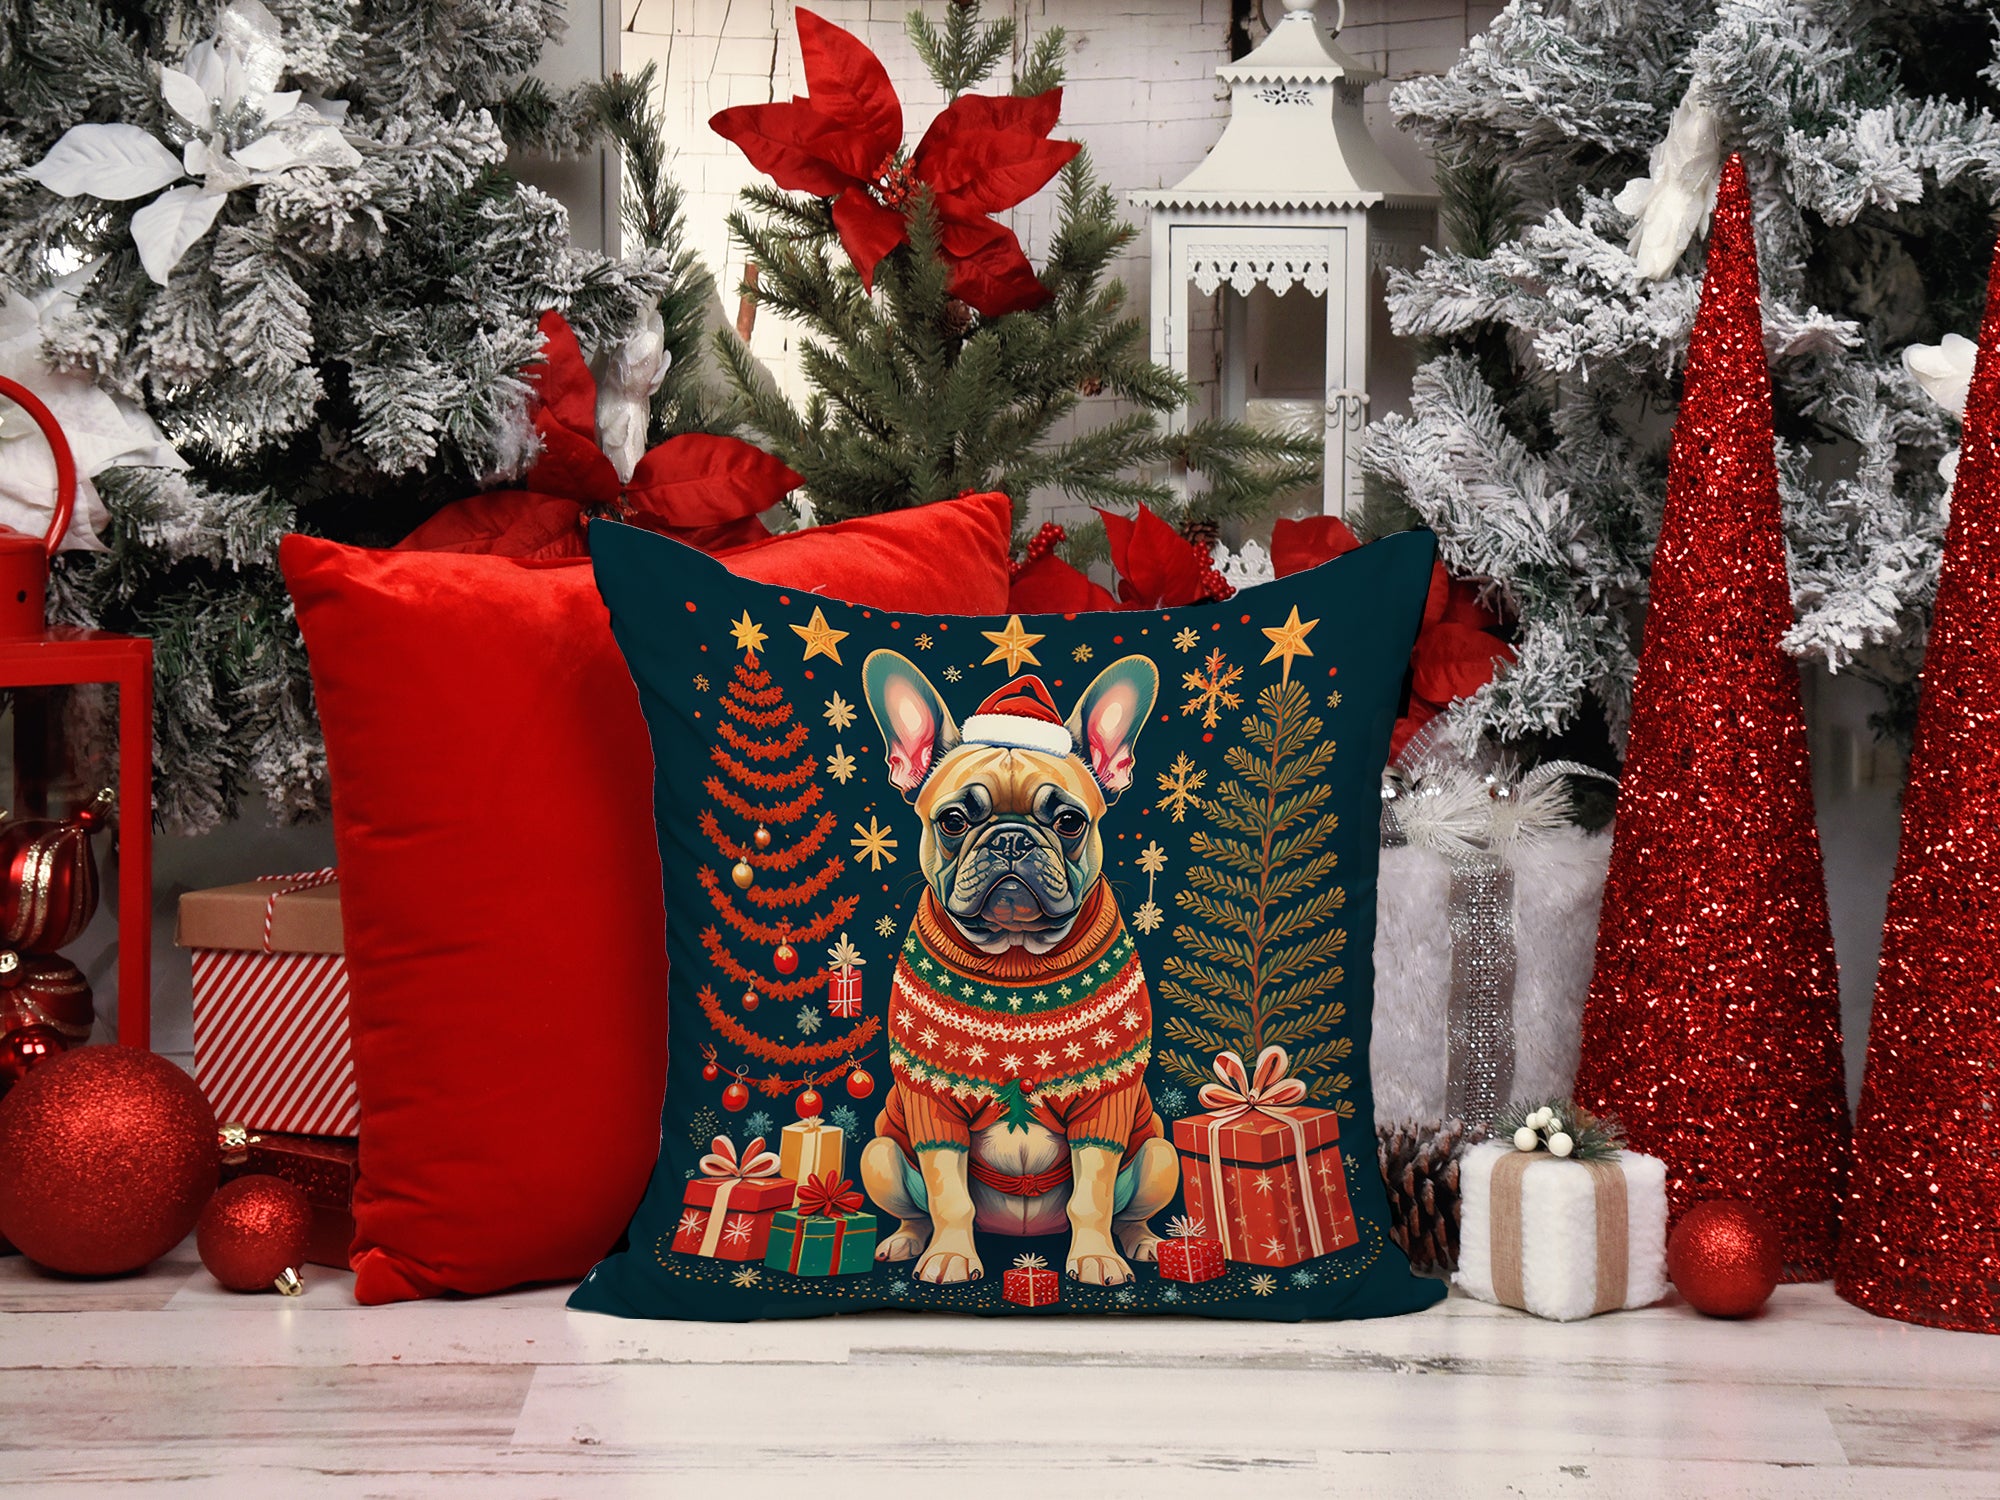 Buy this Fawn French Bulldog Christmas Fabric Decorative Pillow